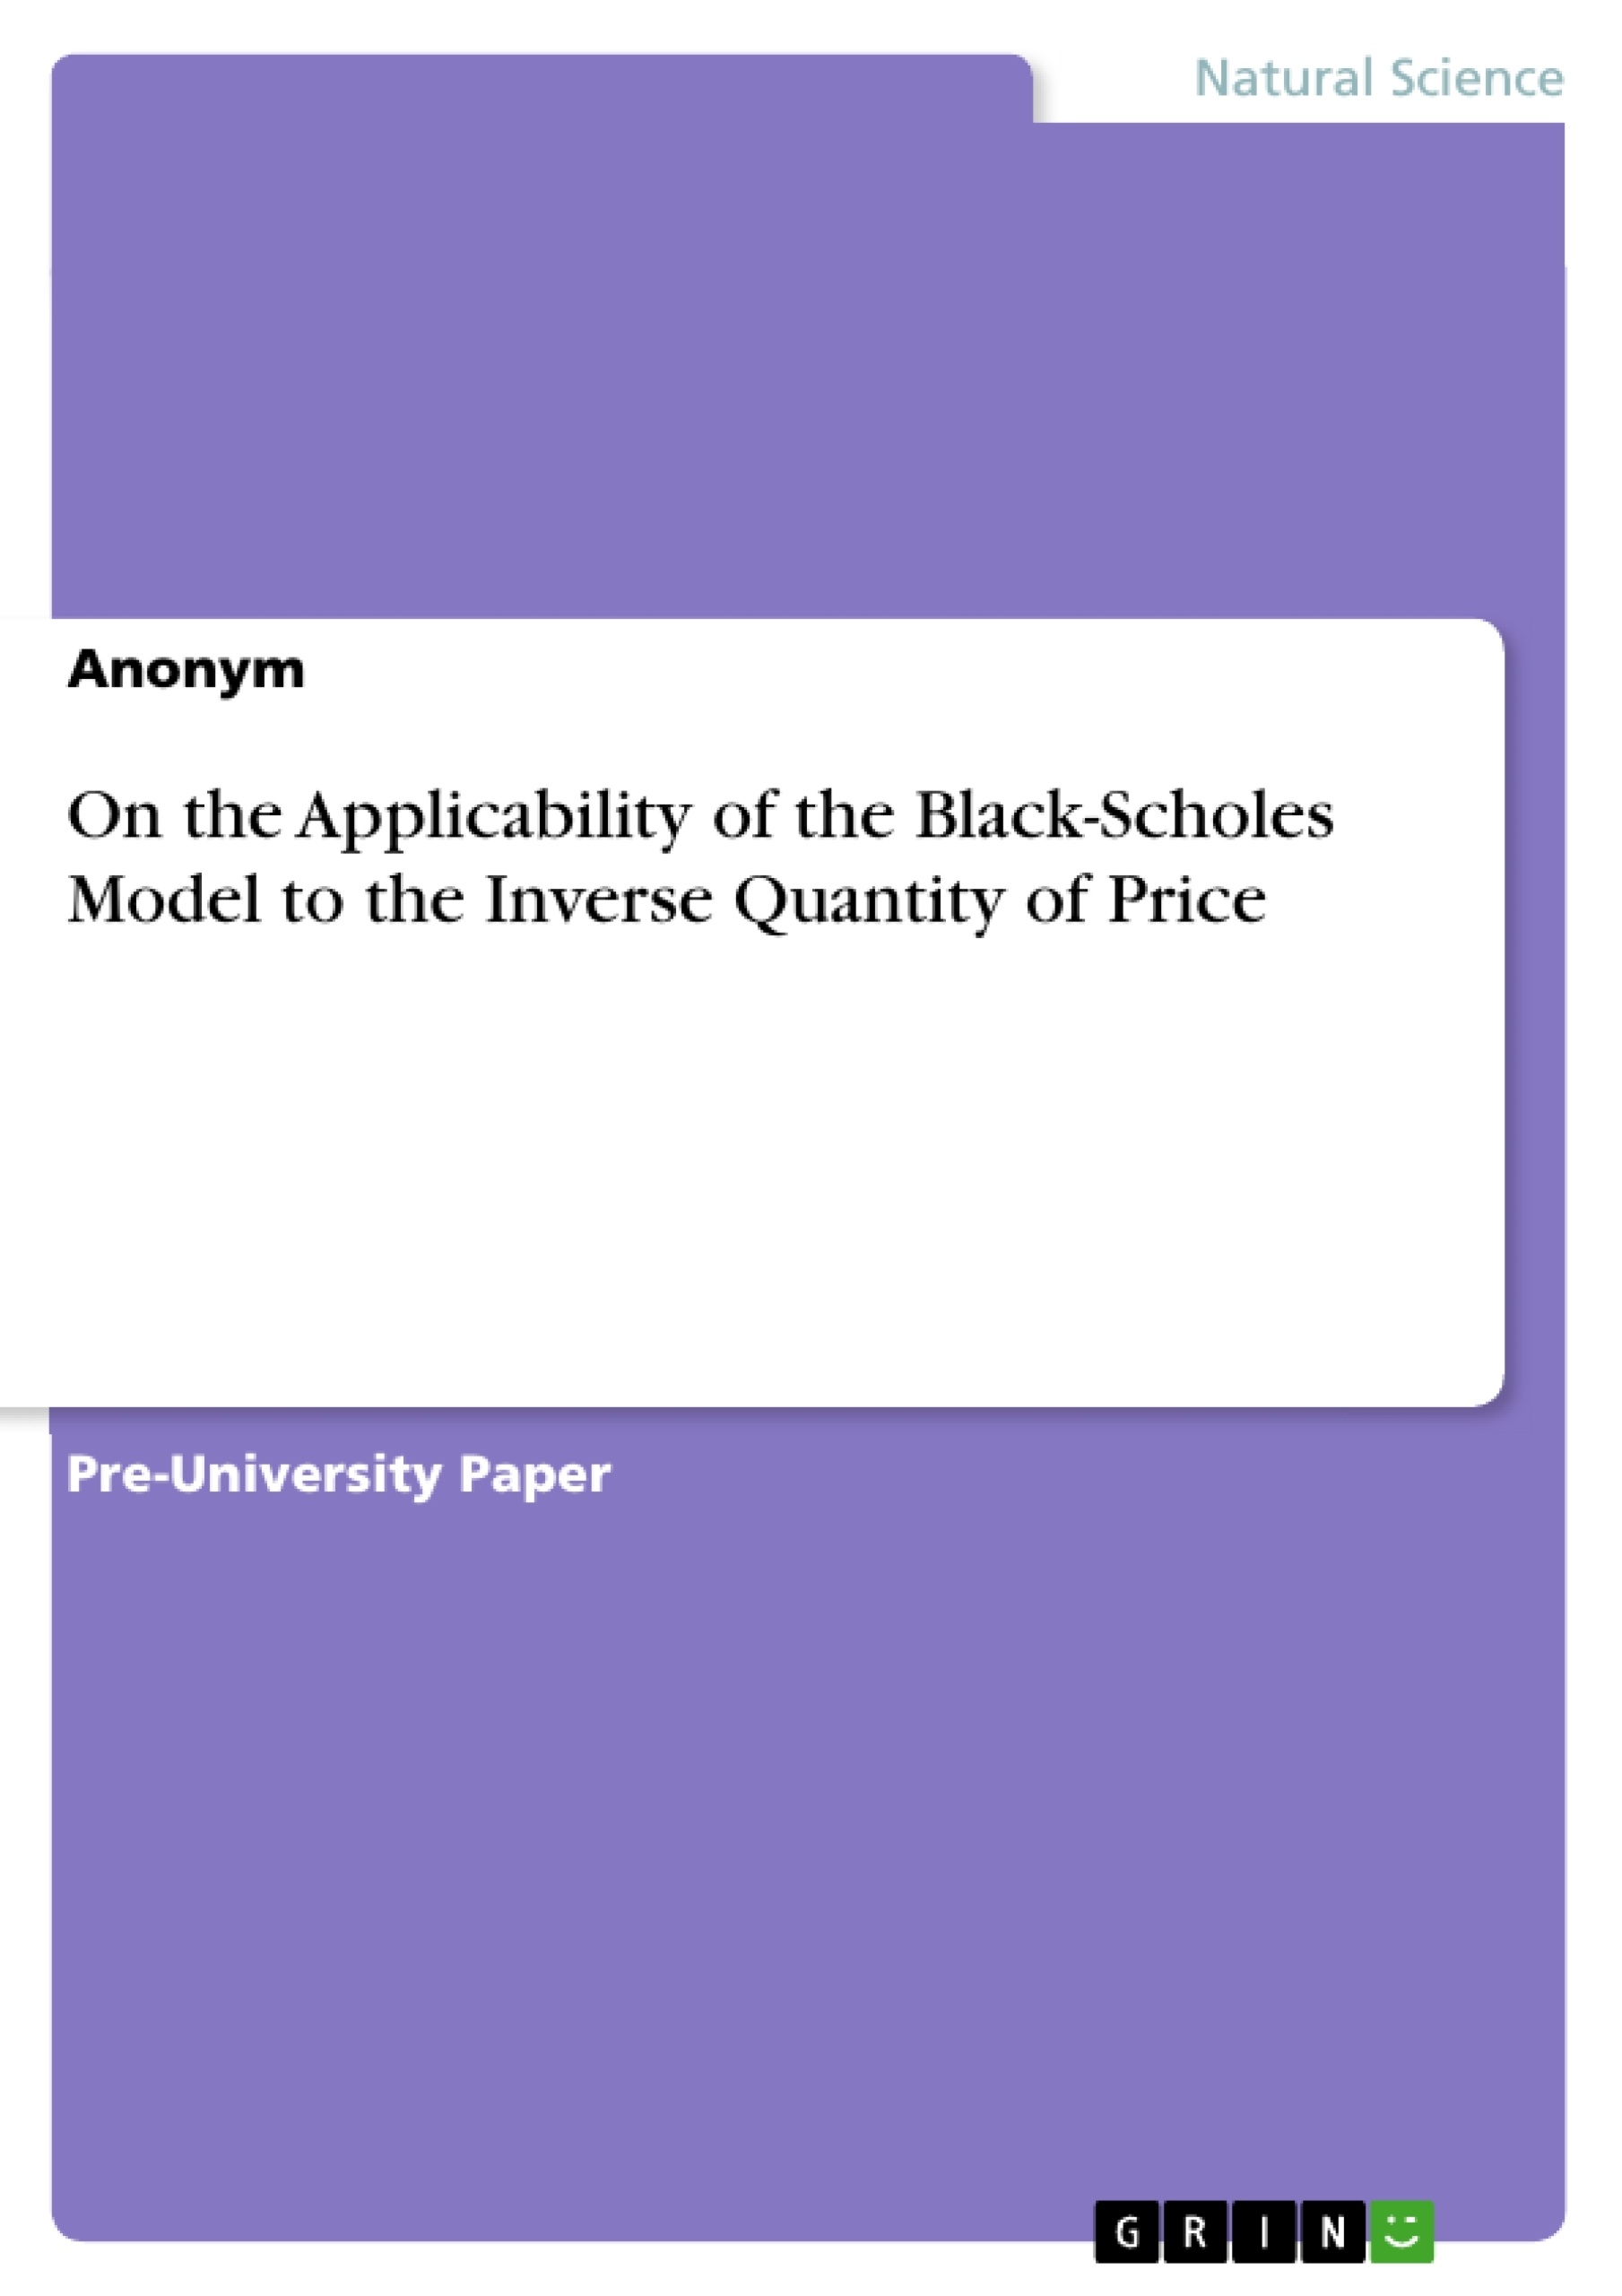 Titre: On the Applicability of the Black-Scholes Model to the Inverse Quantity of Price